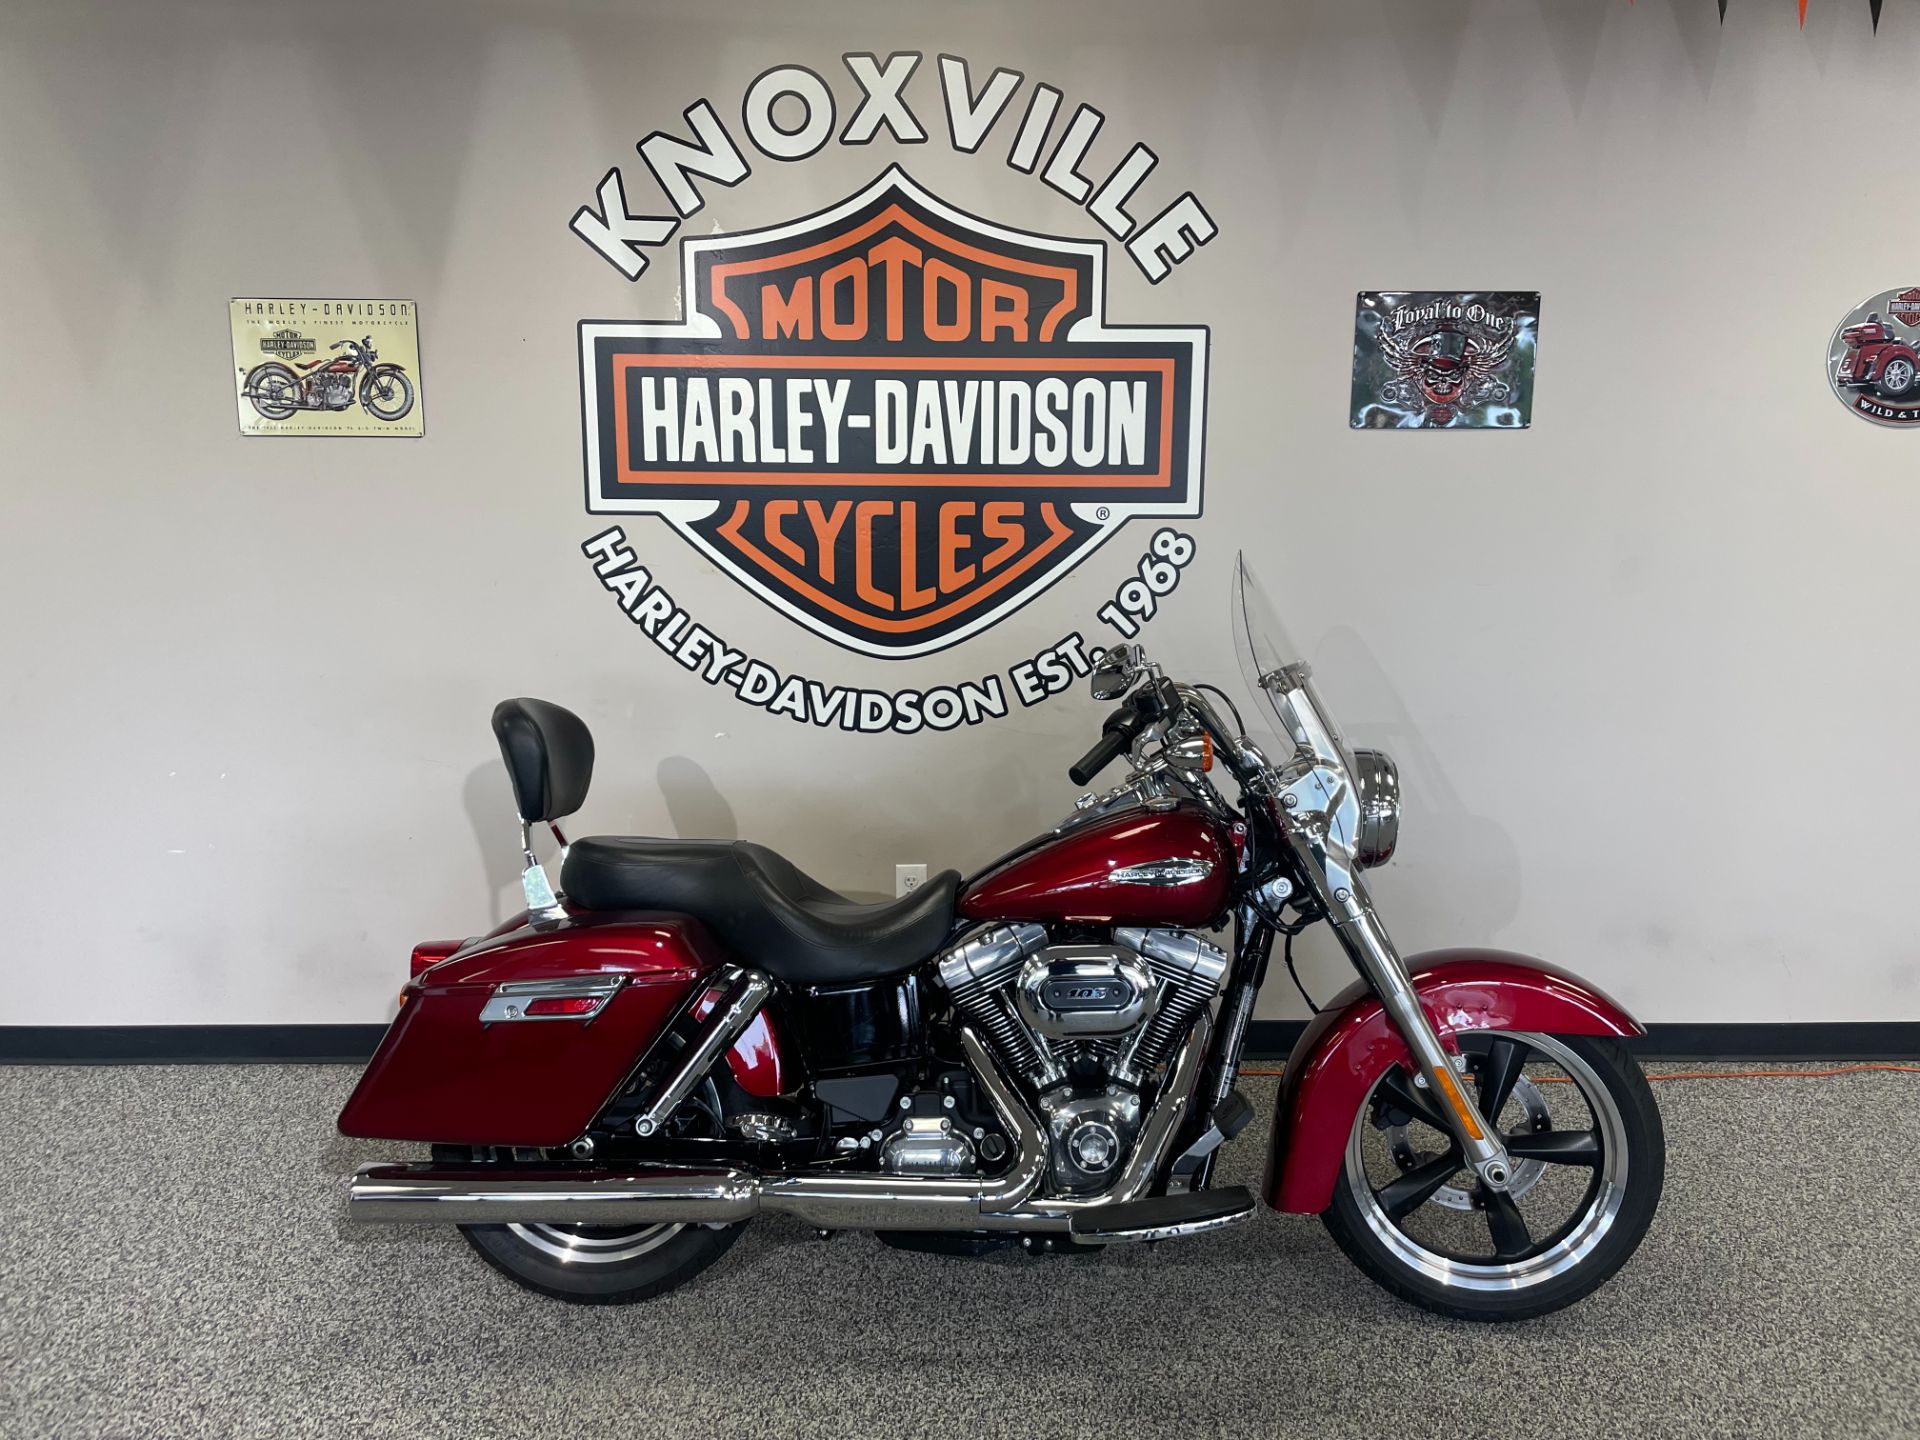 2016 Harley-Davidson DYNA SWITCHBACK 103 in Knoxville, Tennessee - Photo 1